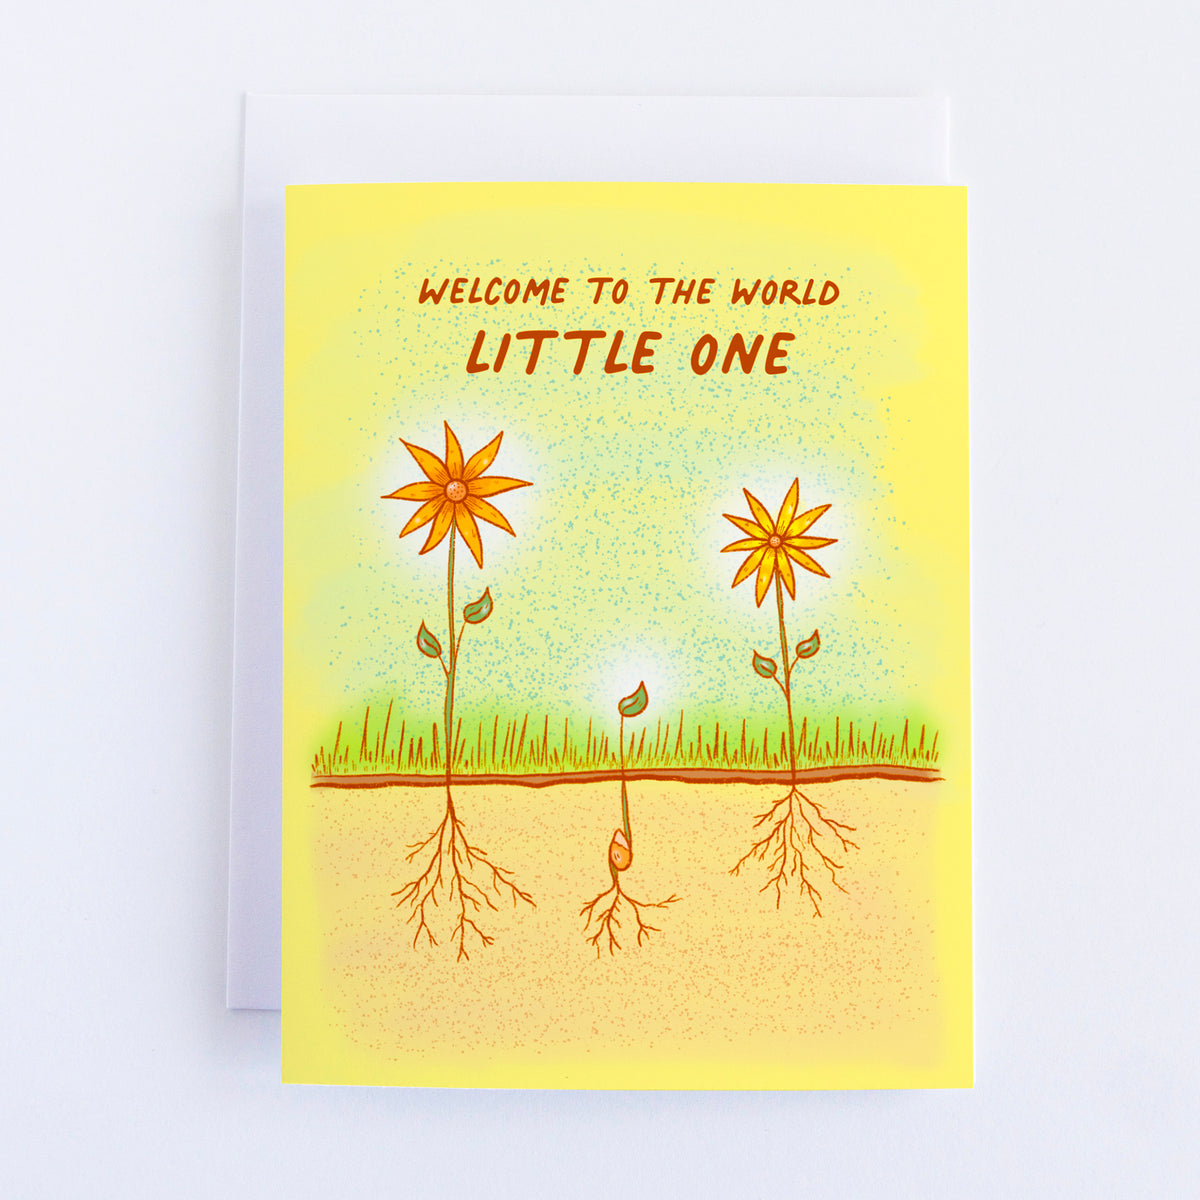 A light green card with two flowers and a seed with a little stem and leaf. The text says Welcome to the world Little One.